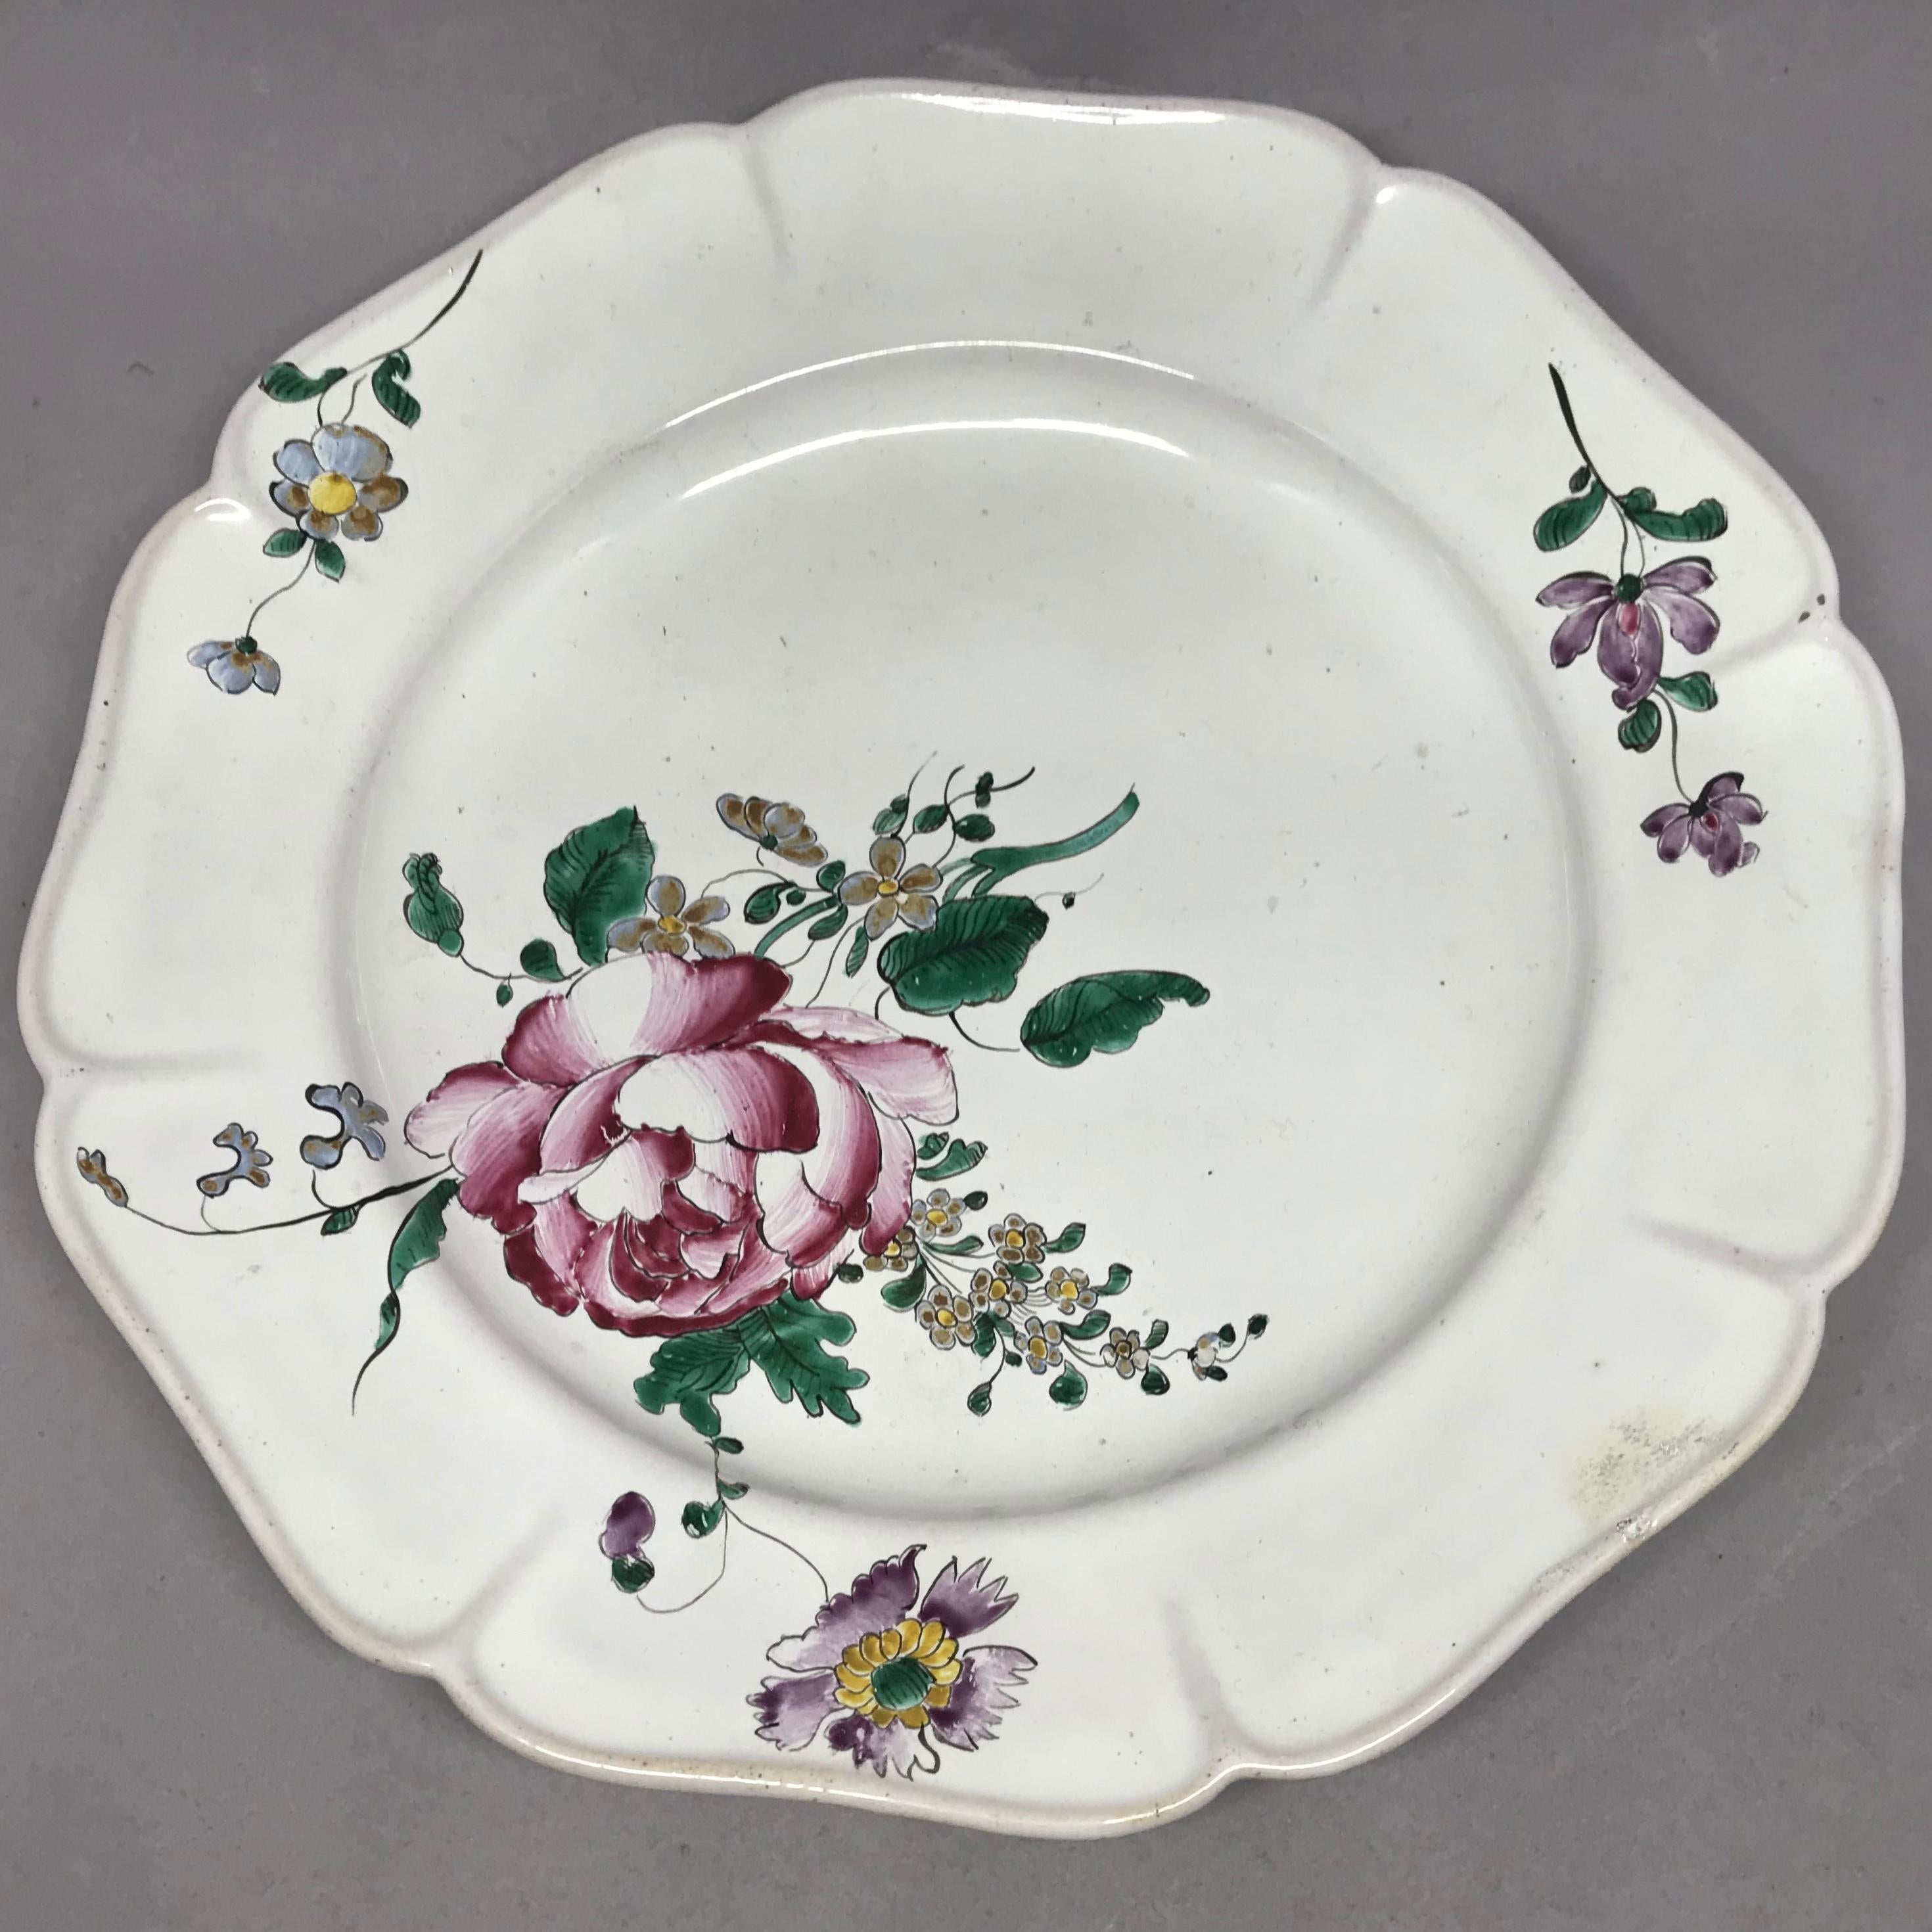 Strasbourg faience floral plate. Antique faience plate with large floral bouquets and lobed rims with further floral sprays and insects; with blue underglaze markings for Hannong Factory, France, circa 1750. 
Dimension: 9